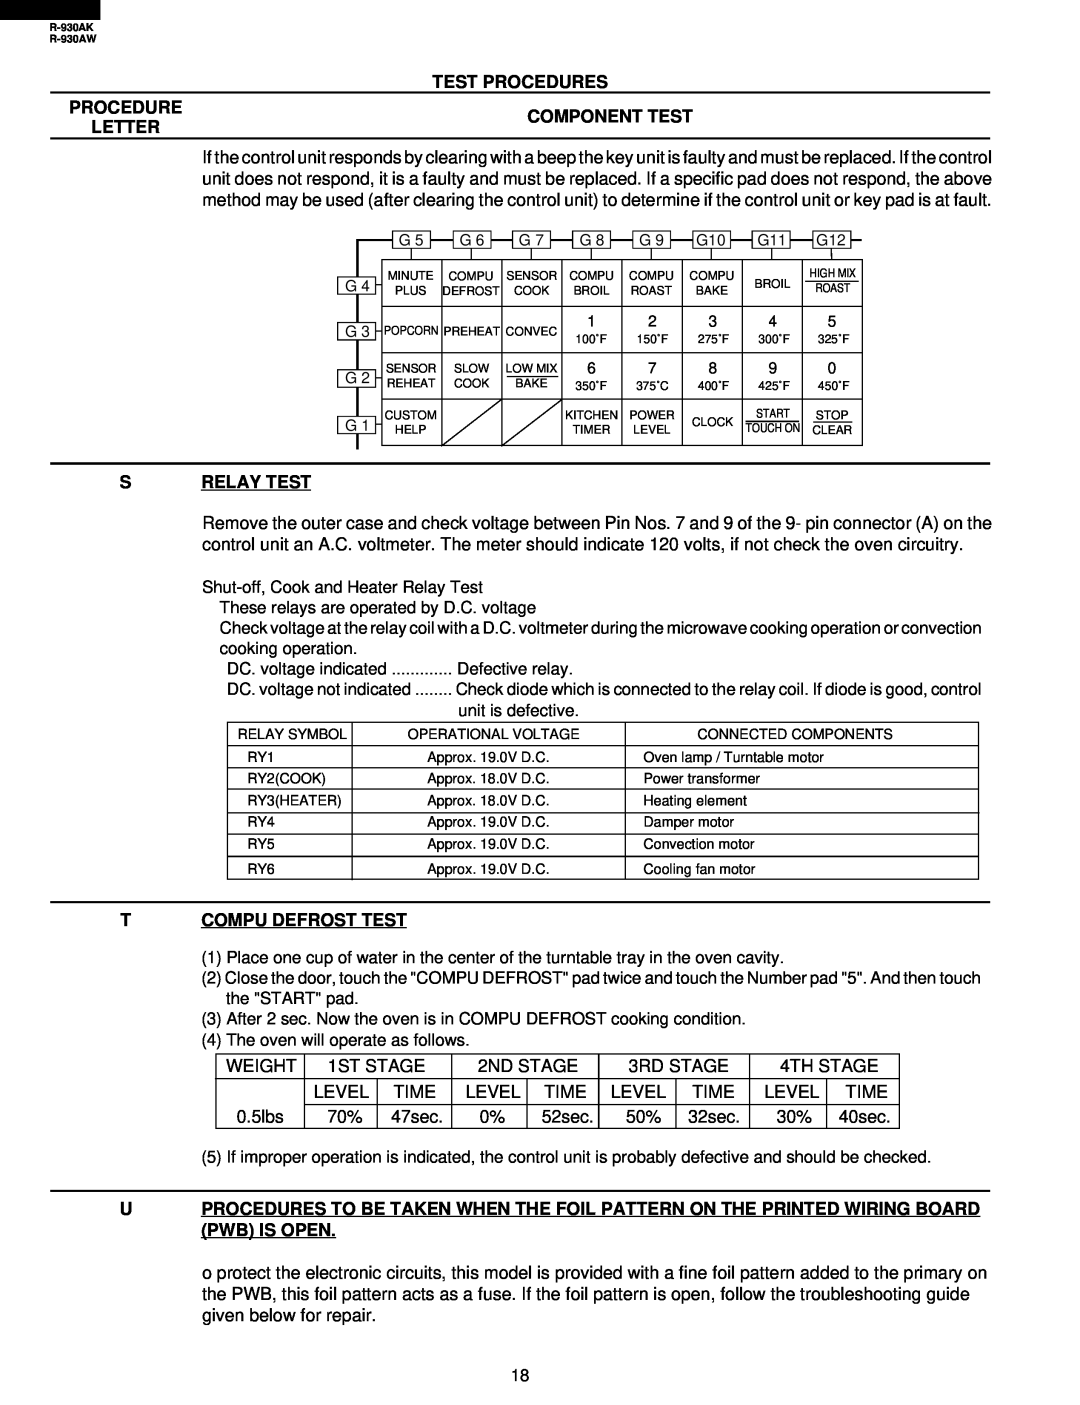 Sharp R-930AW service manual Test Procedures, Component Test, Letter, S Relay Test, Compu Defrost Test 